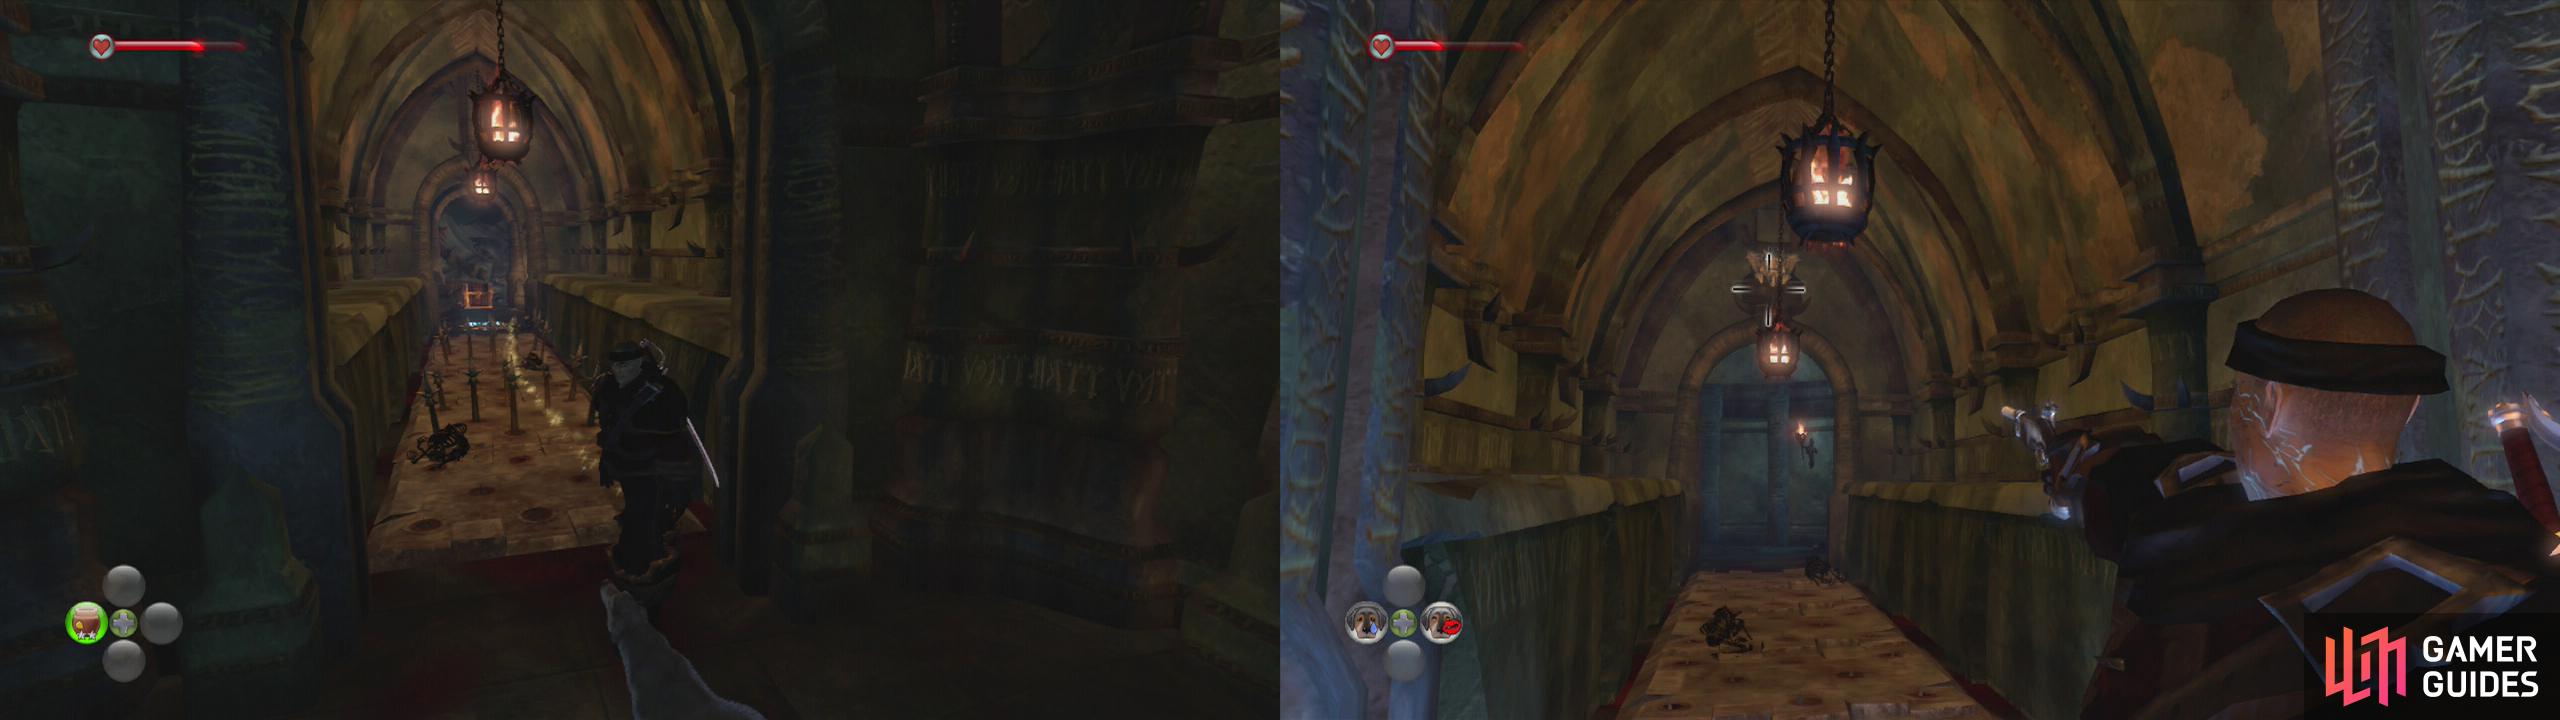 Make your way across the spike traps on the floor (left), then once you are across, turn around and shoot the gargoyle (right).